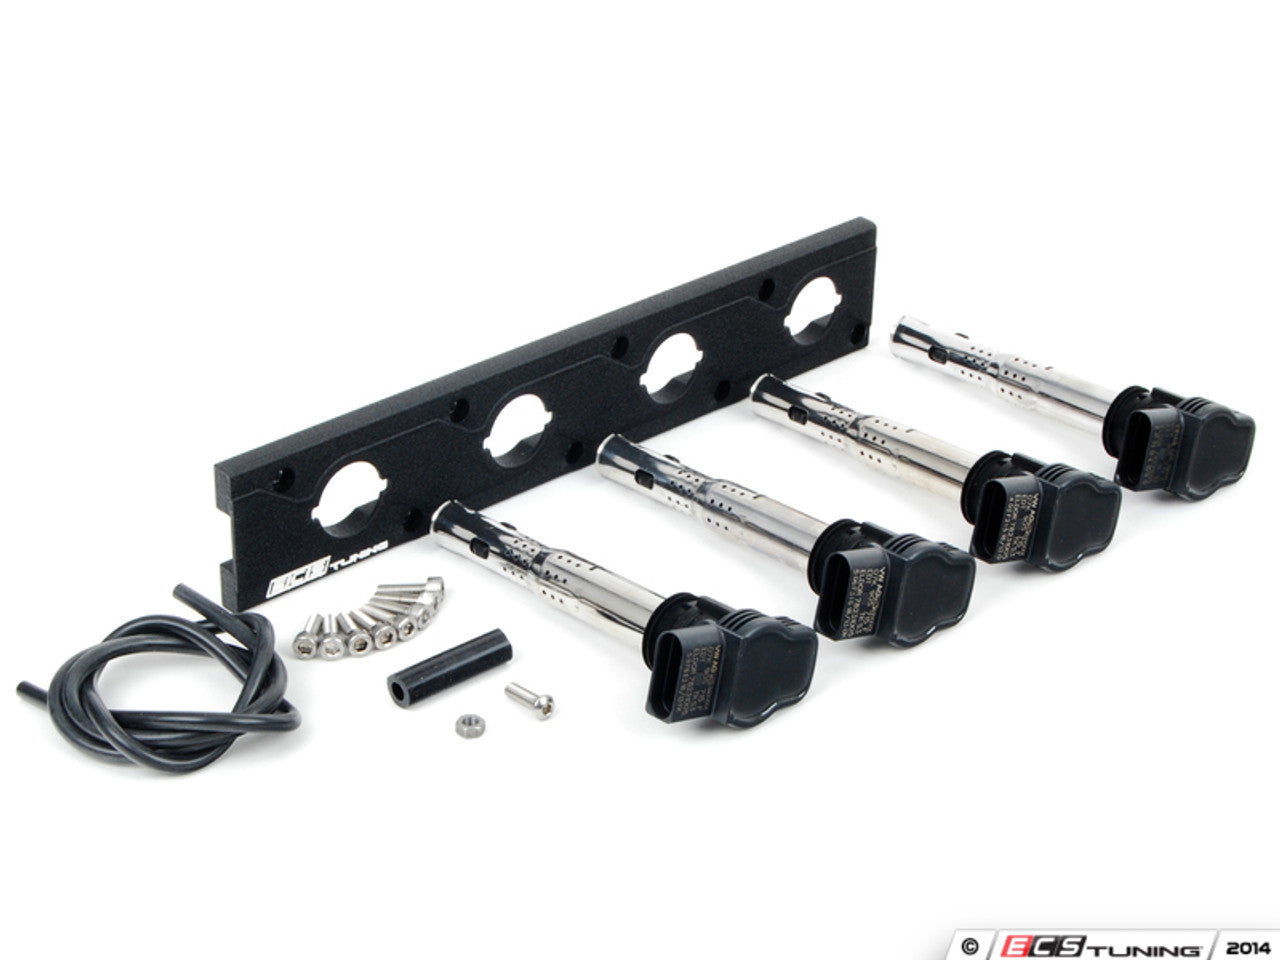  Coil Pack Conversion Kit